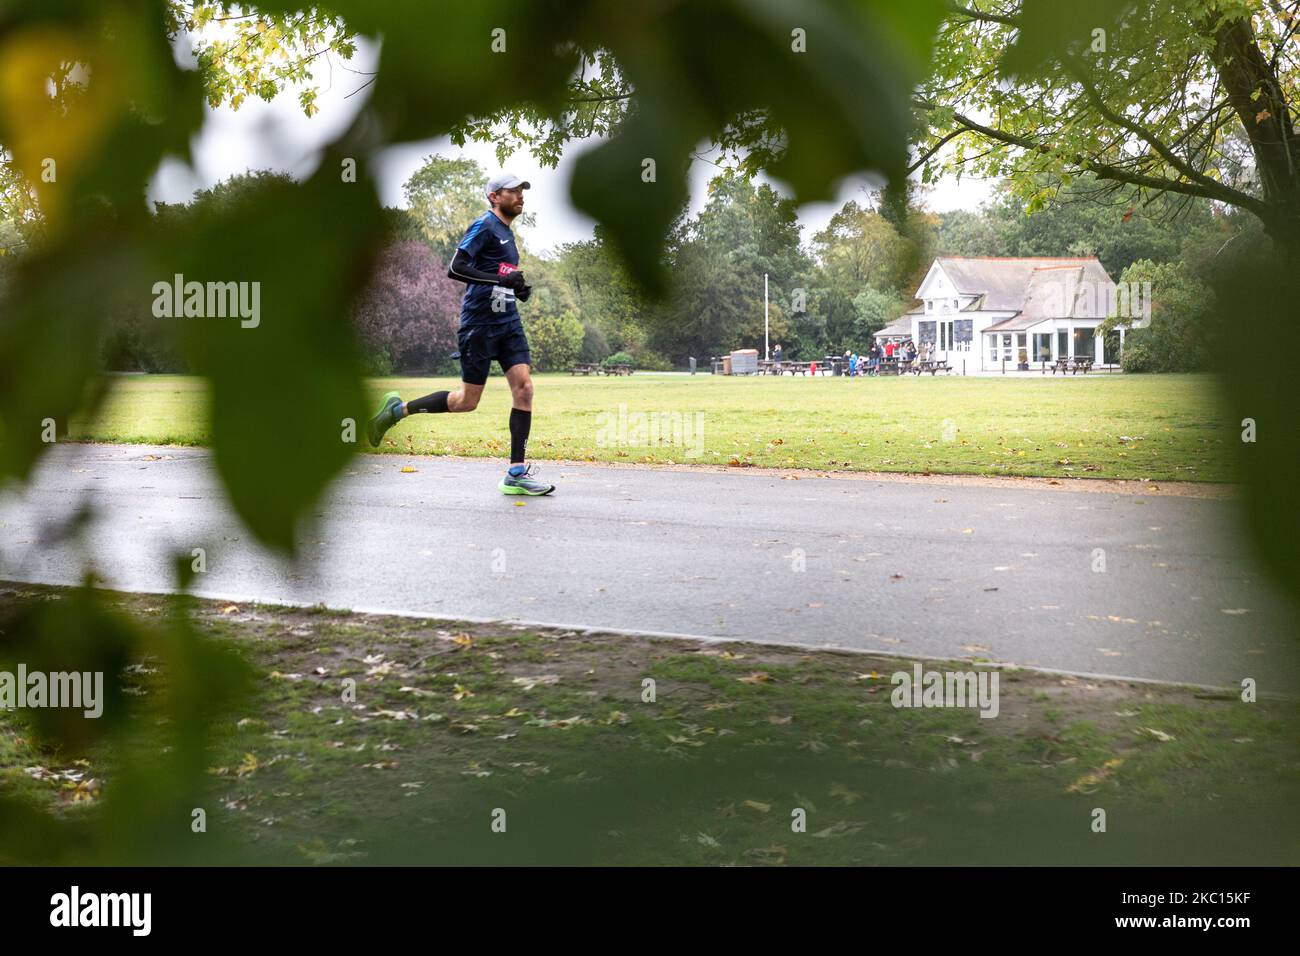 Puru Rai, a participant of Virgin Money Virtual London Marathon is seen running in cold rainy weather in Dulwich Park in South London, England on October 4, 2020. Due to Covid-19 pandemic, the London Marathon for the public was virtual. Participants run in locations of the choice, having a mobile application as a monitoring system. Family and friends often took shorter distances to support the runner. (Photo by Dominika Zarzycka/NurPhoto) Stock Photo